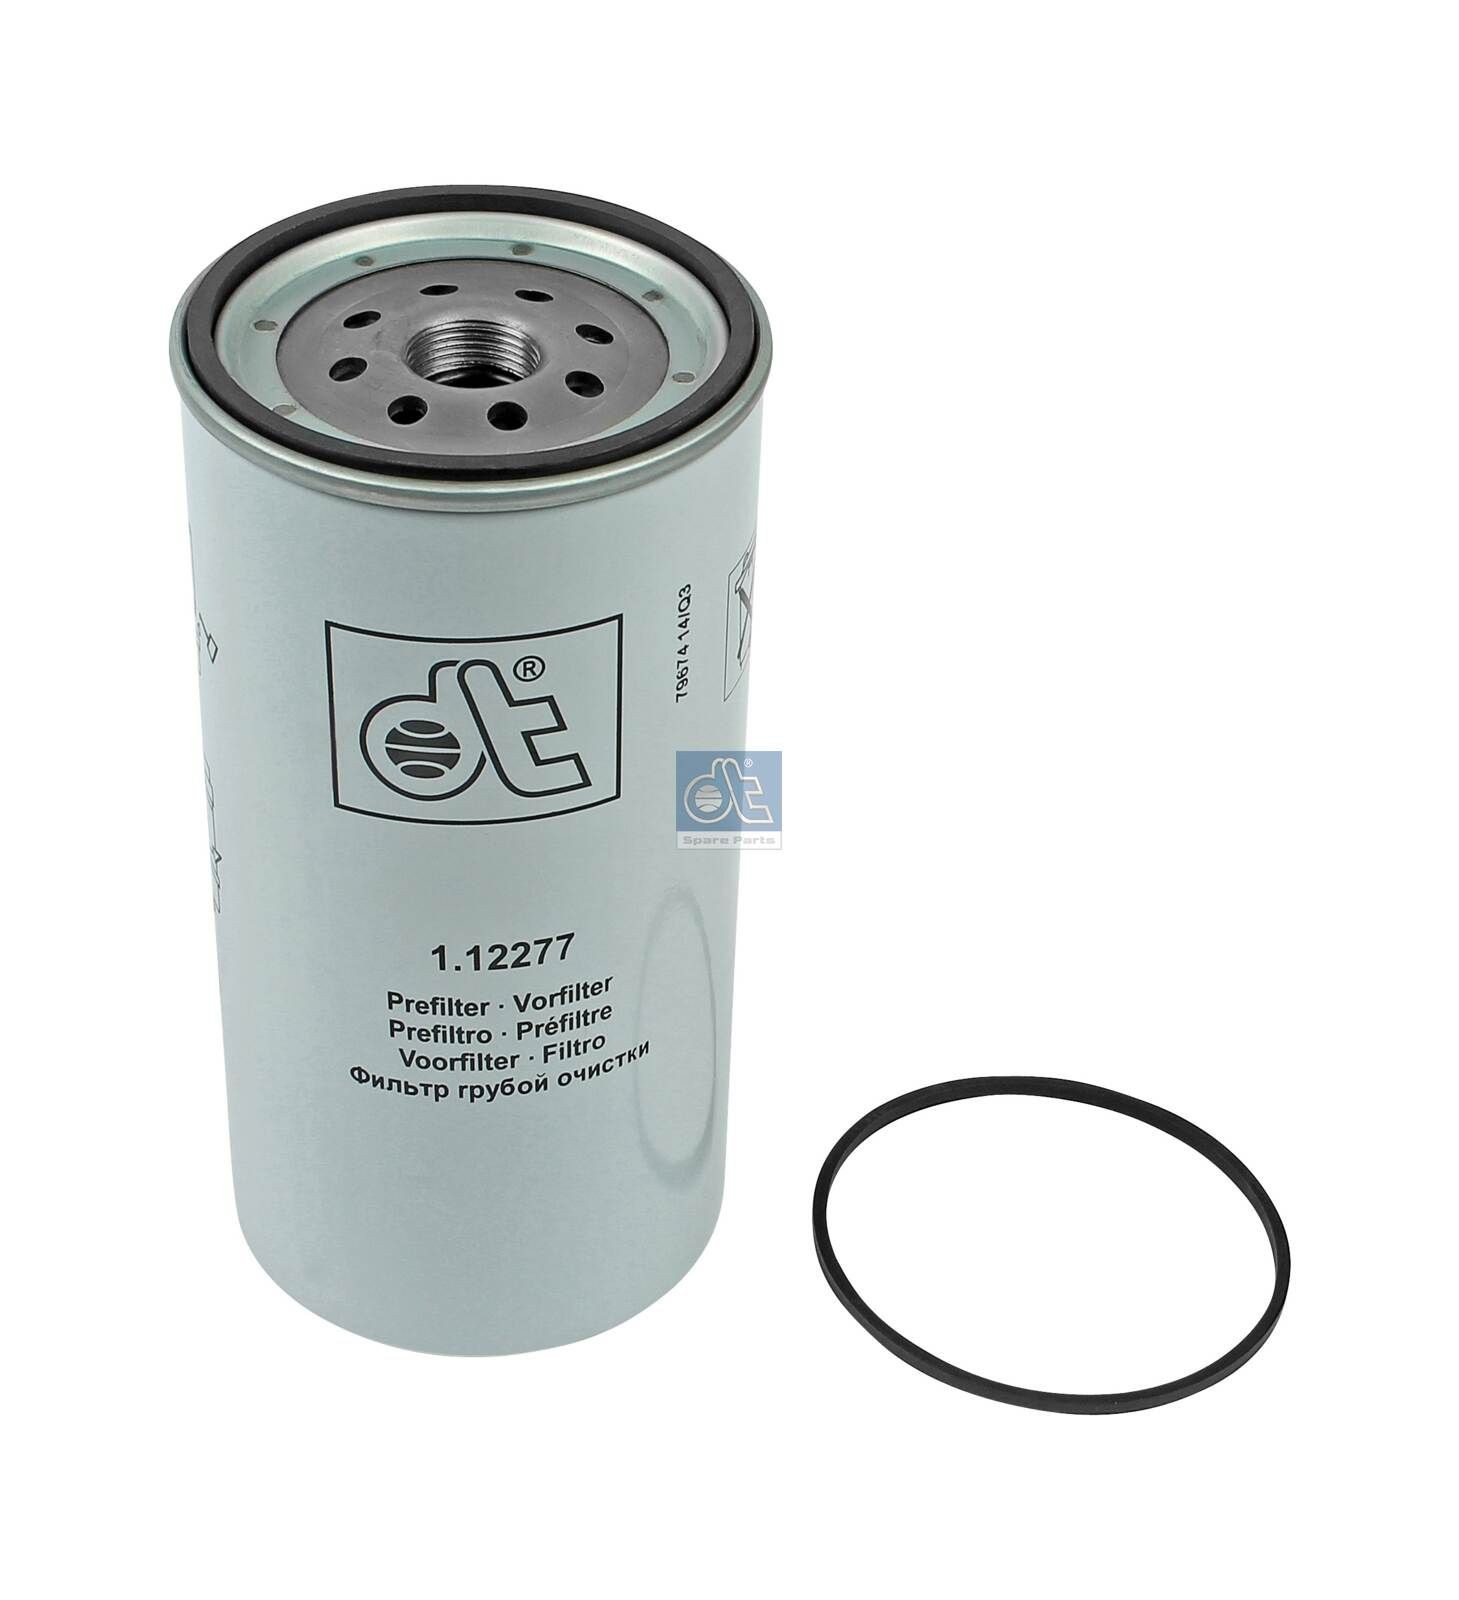 WK 1080/6 x DT Spare Parts 1.12277 Fuel filter 21380500